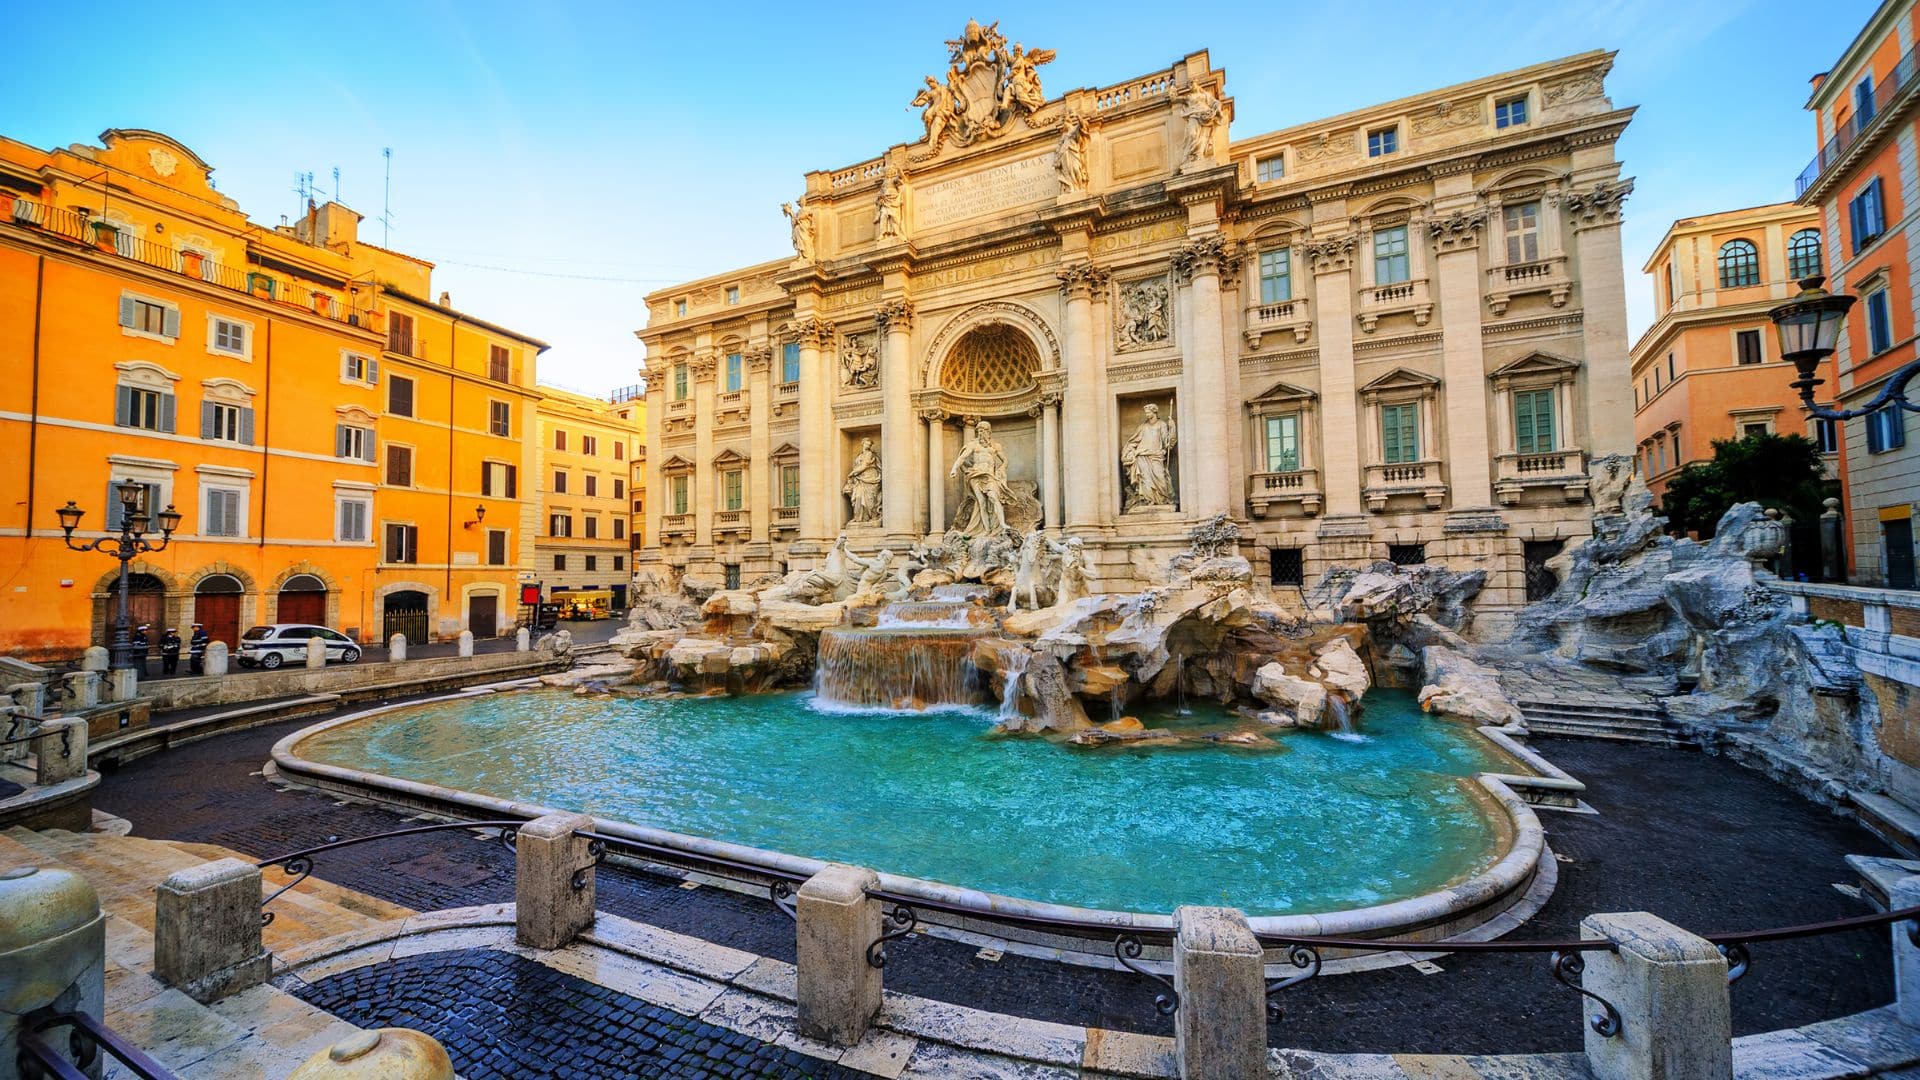 <p>Italy is a beautiful place to visit for families. However, the capital of Rome might not be the most suitable for kids. As tourism rises yearly in the city, it becomes increasingly chaotic and less ideal for children. From long lines to limited transportation, here are 15 reasons to bypass Rome for a family vacation and head somewhere else instead.</p>